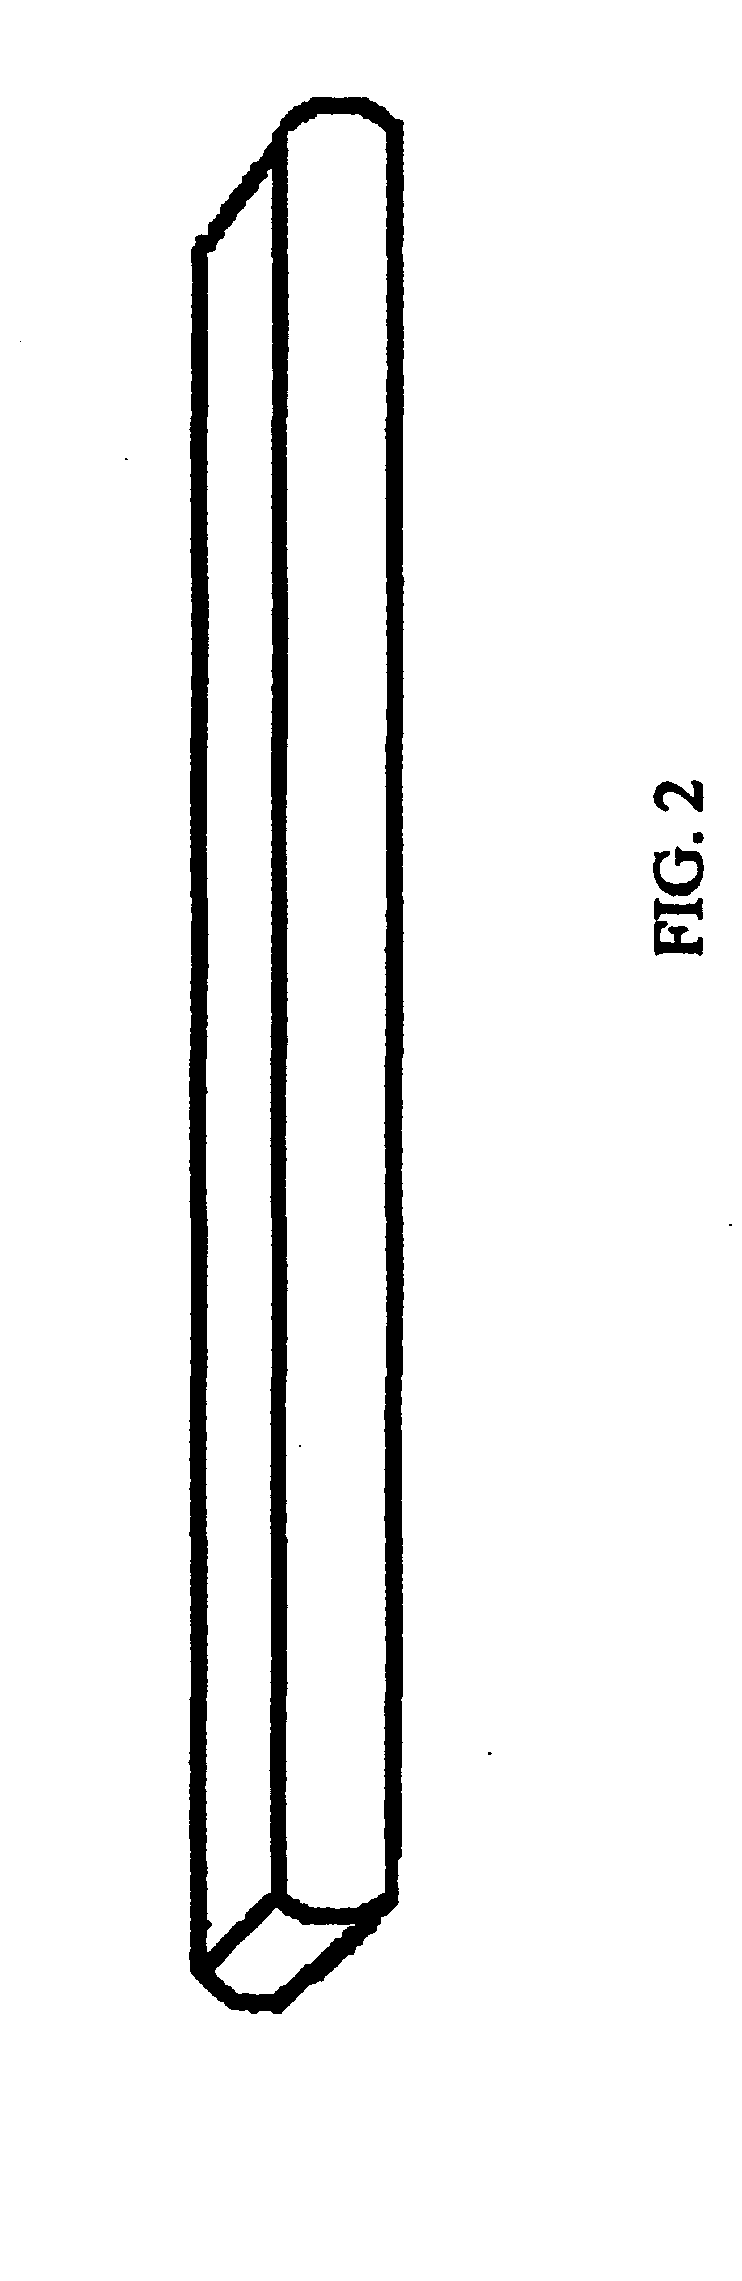 Pad for back or neck correction and method of using same